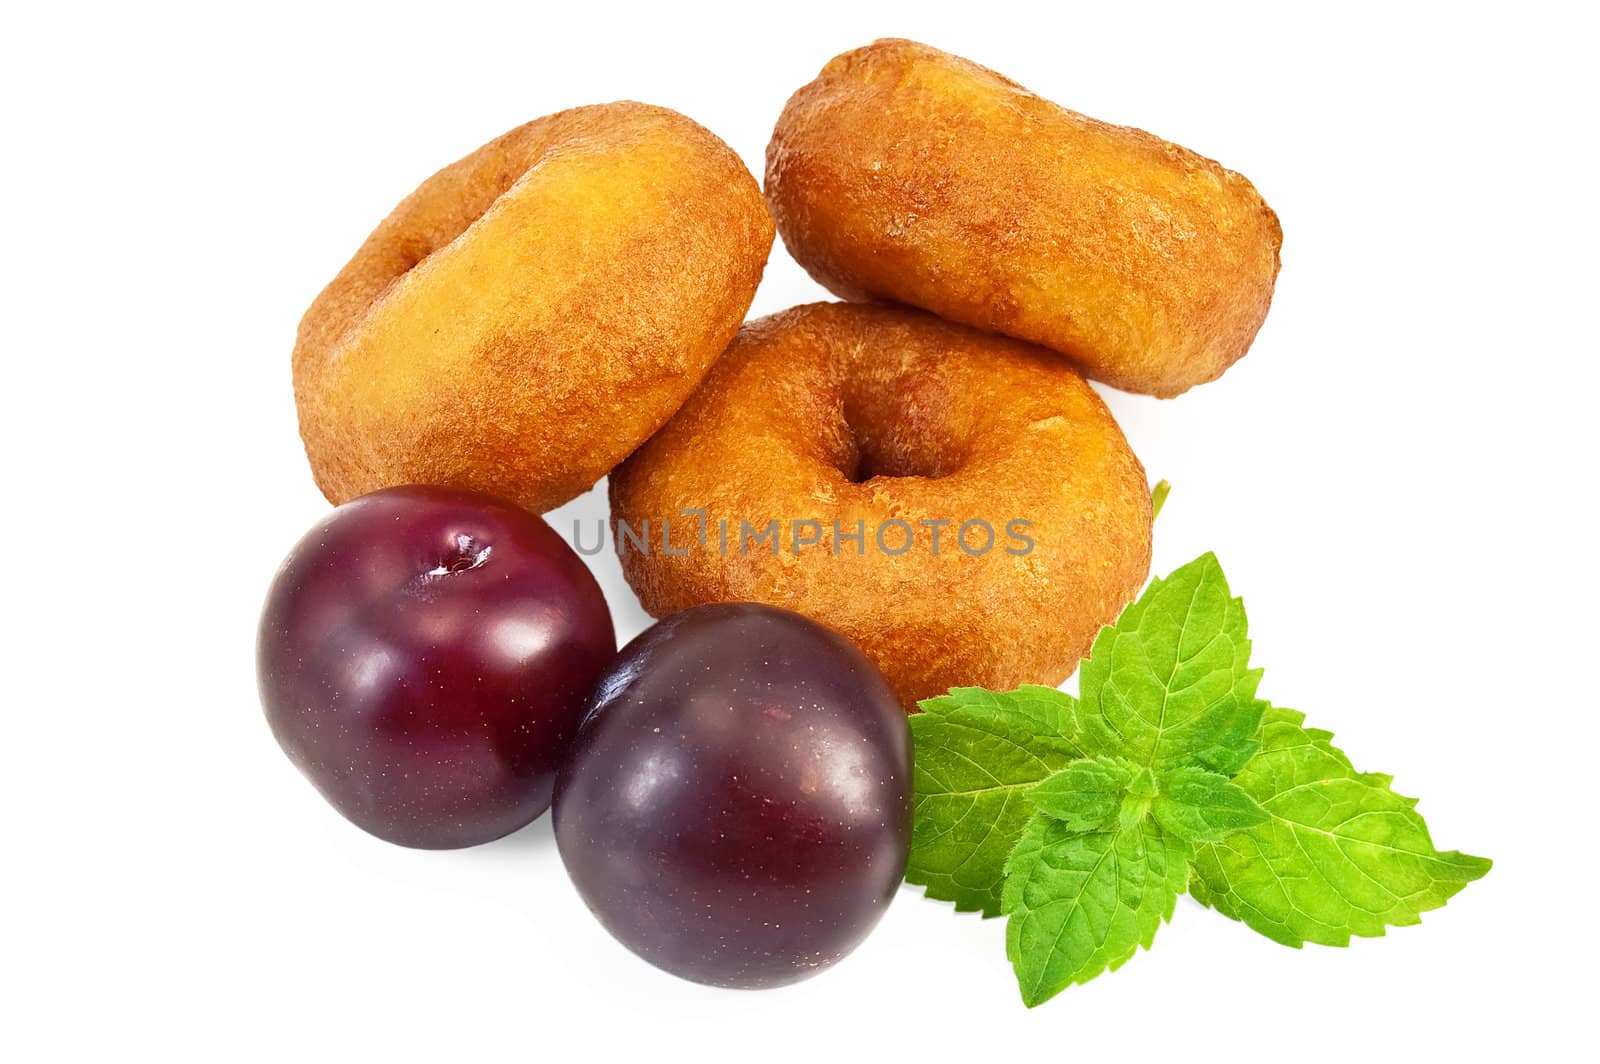 Three donuts, sprig of green mint, two plums isolated on a white background